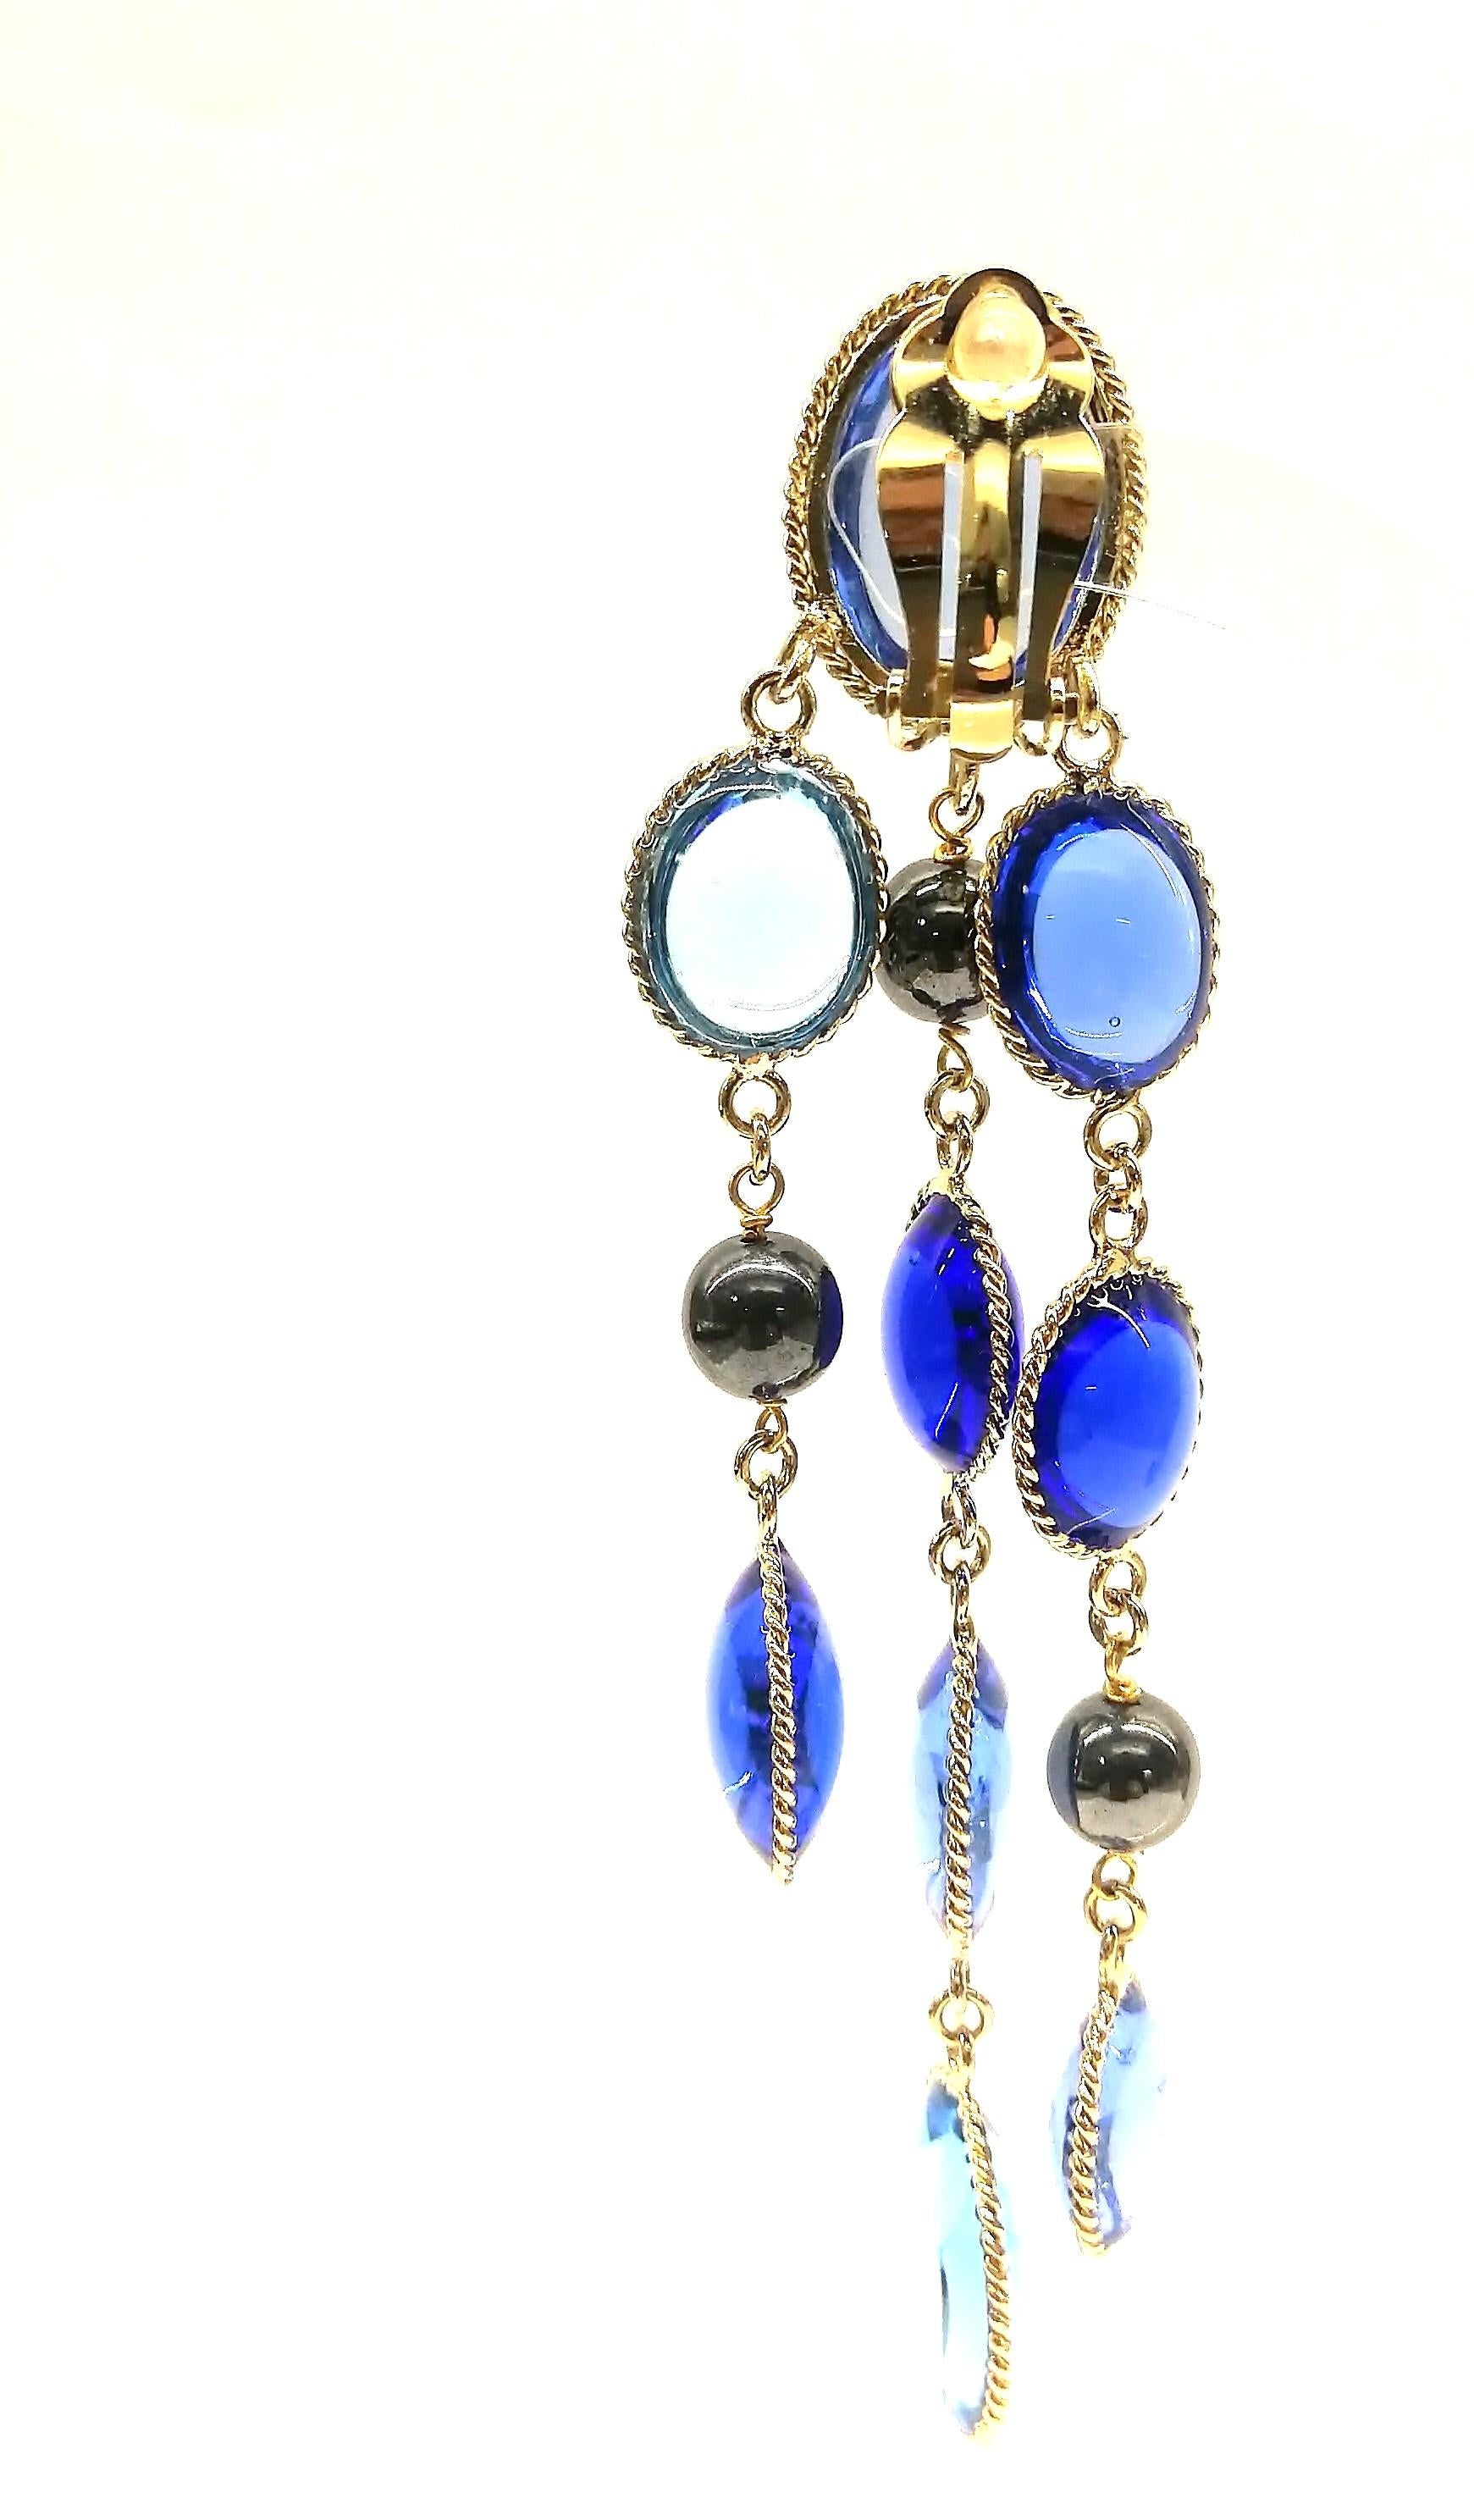 'WW; sapphire, light sapphire poured glass, and pearl 3 row drop earrings, 2018 For Sale 1